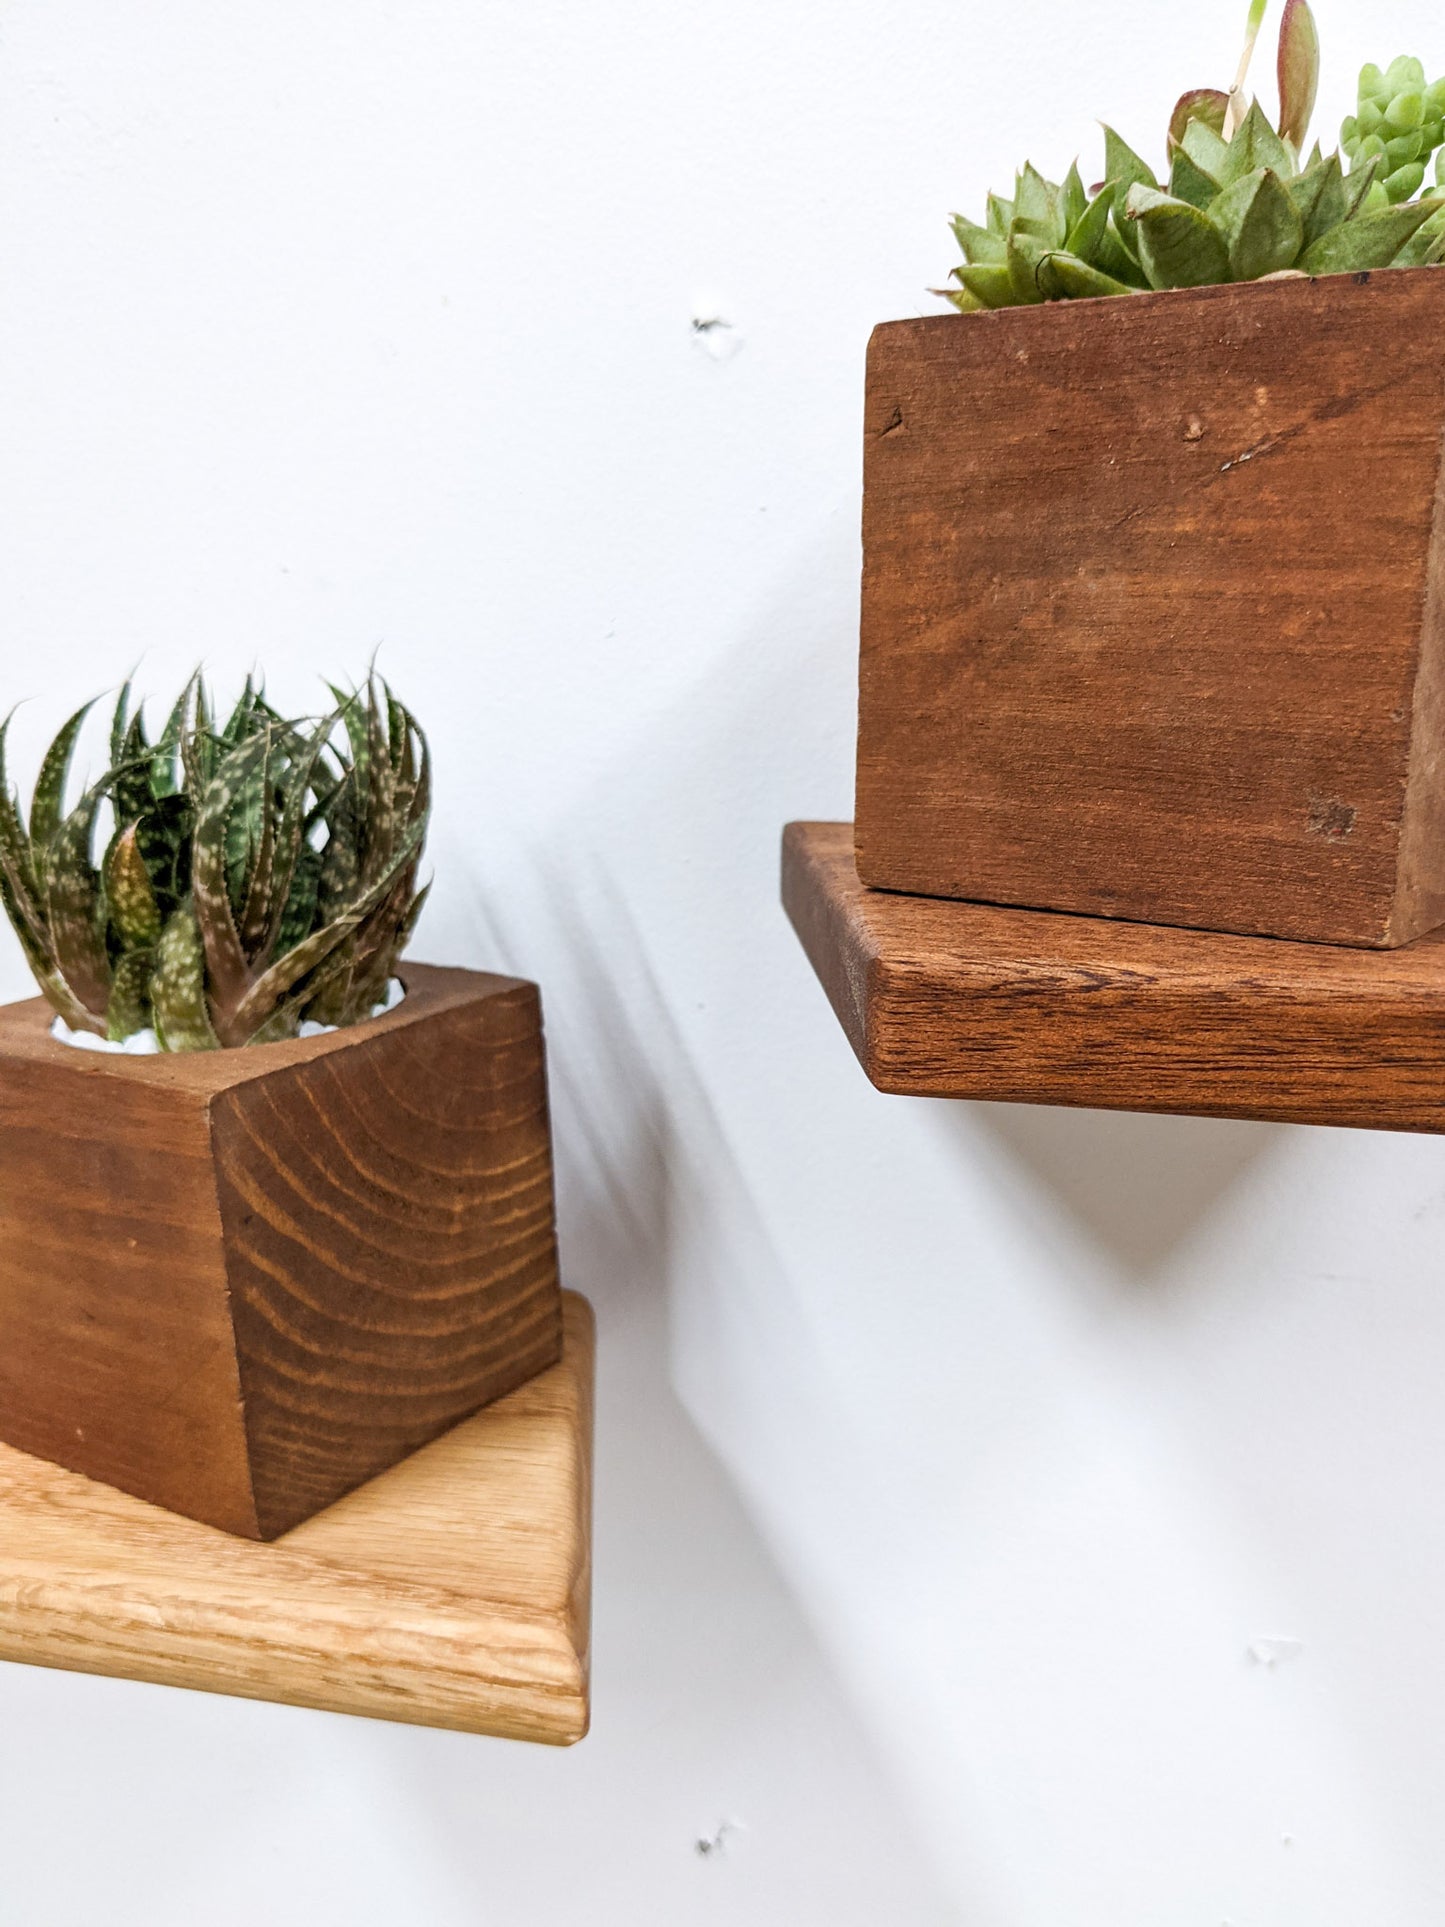 A close up of the wood grain and soft bevelled edges of both the oak and mahogany floating shelves. Each small wooden shelf holds a mahogany planter with succulents.